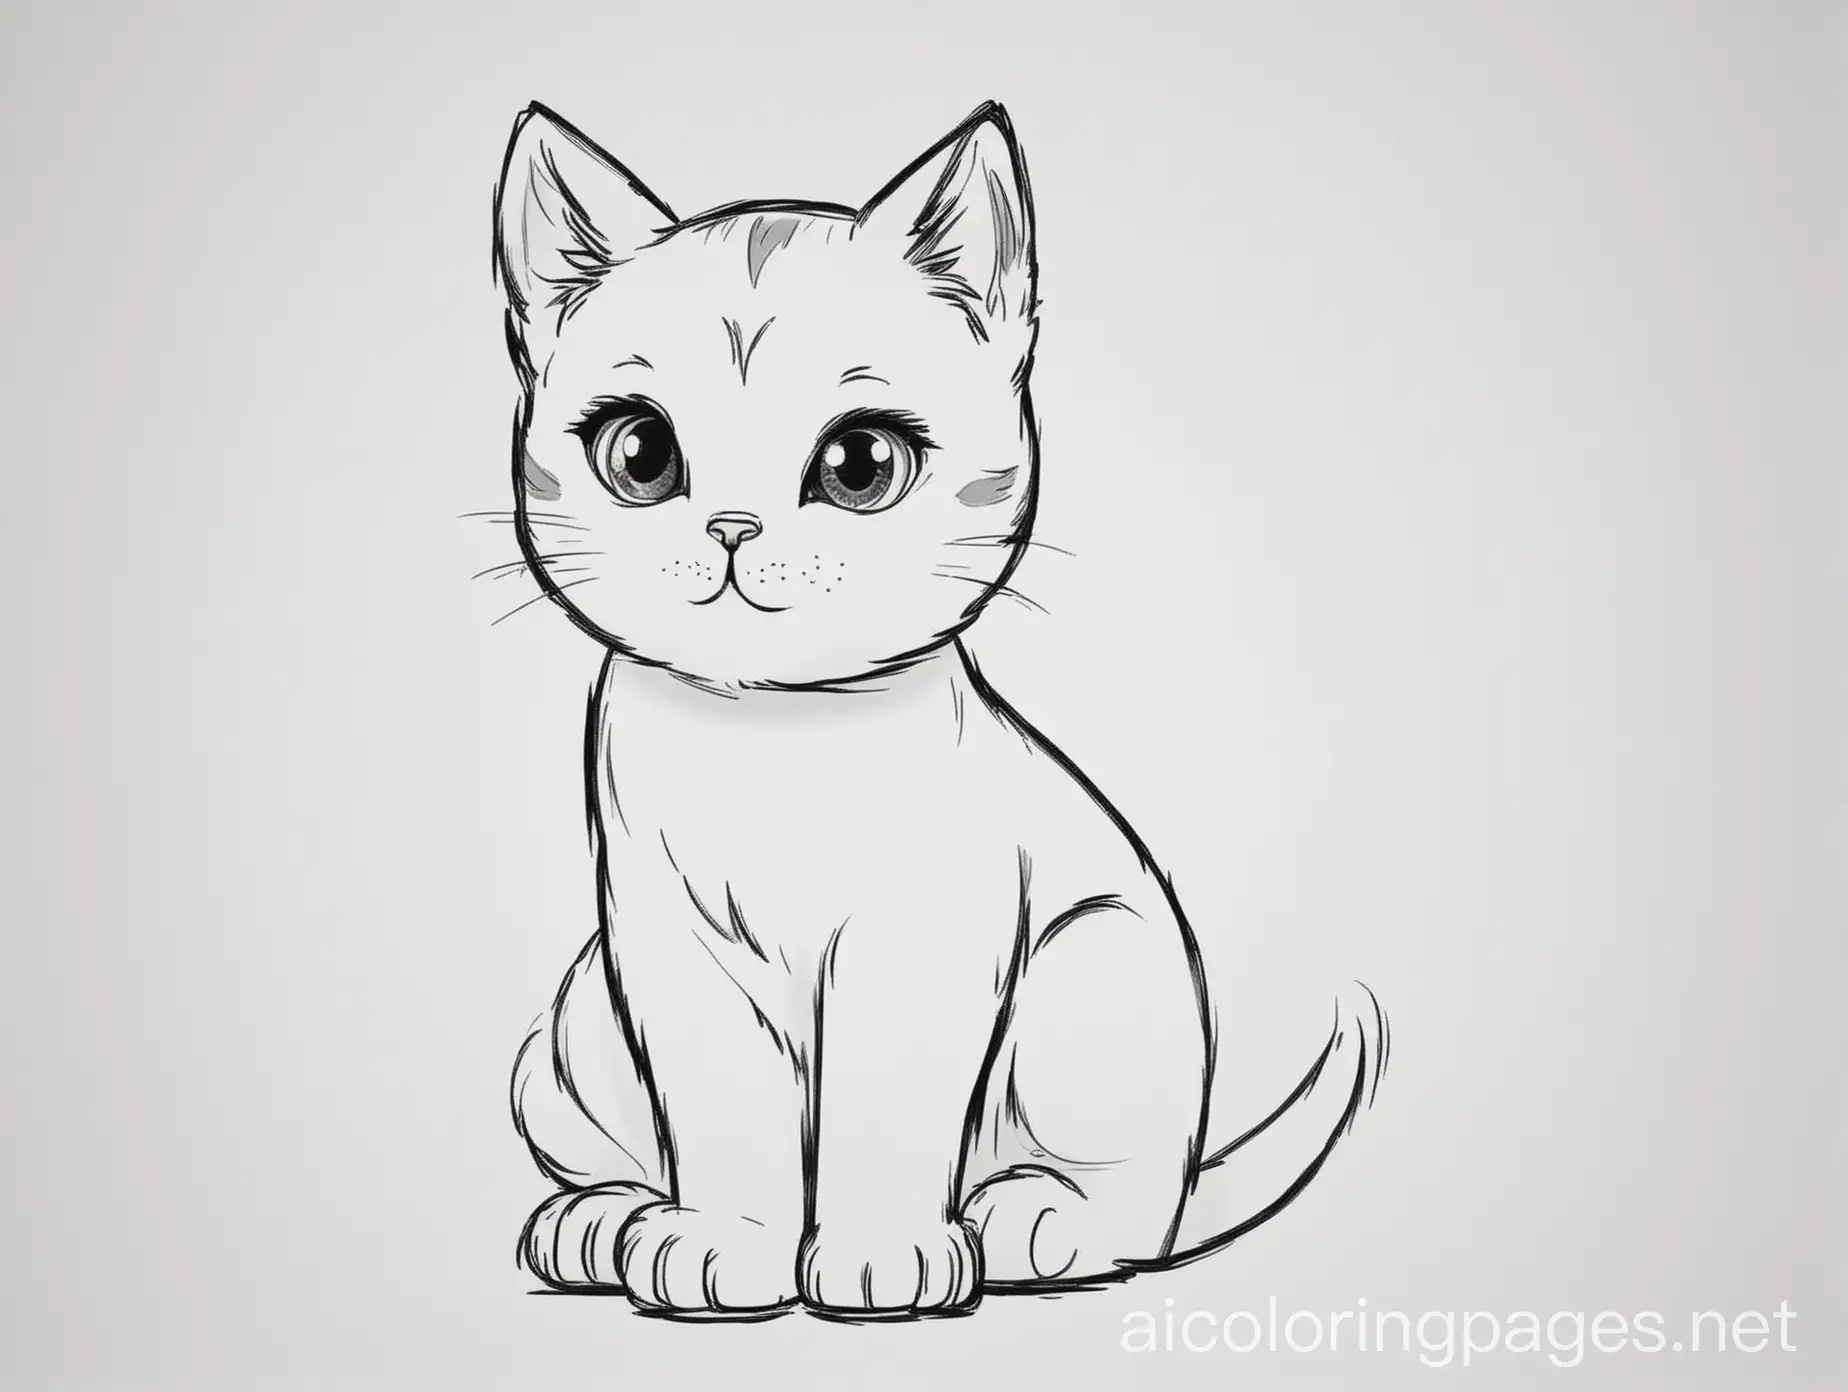 kitty cat
, Coloring Page, black and white, line art, white background, Simplicity, Ample White Space. The background of the coloring page is plain white to make it easy for young children to color within the lines. The outlines of all the subjects are easy to distinguish, making it simple for kids to color without too much difficulty